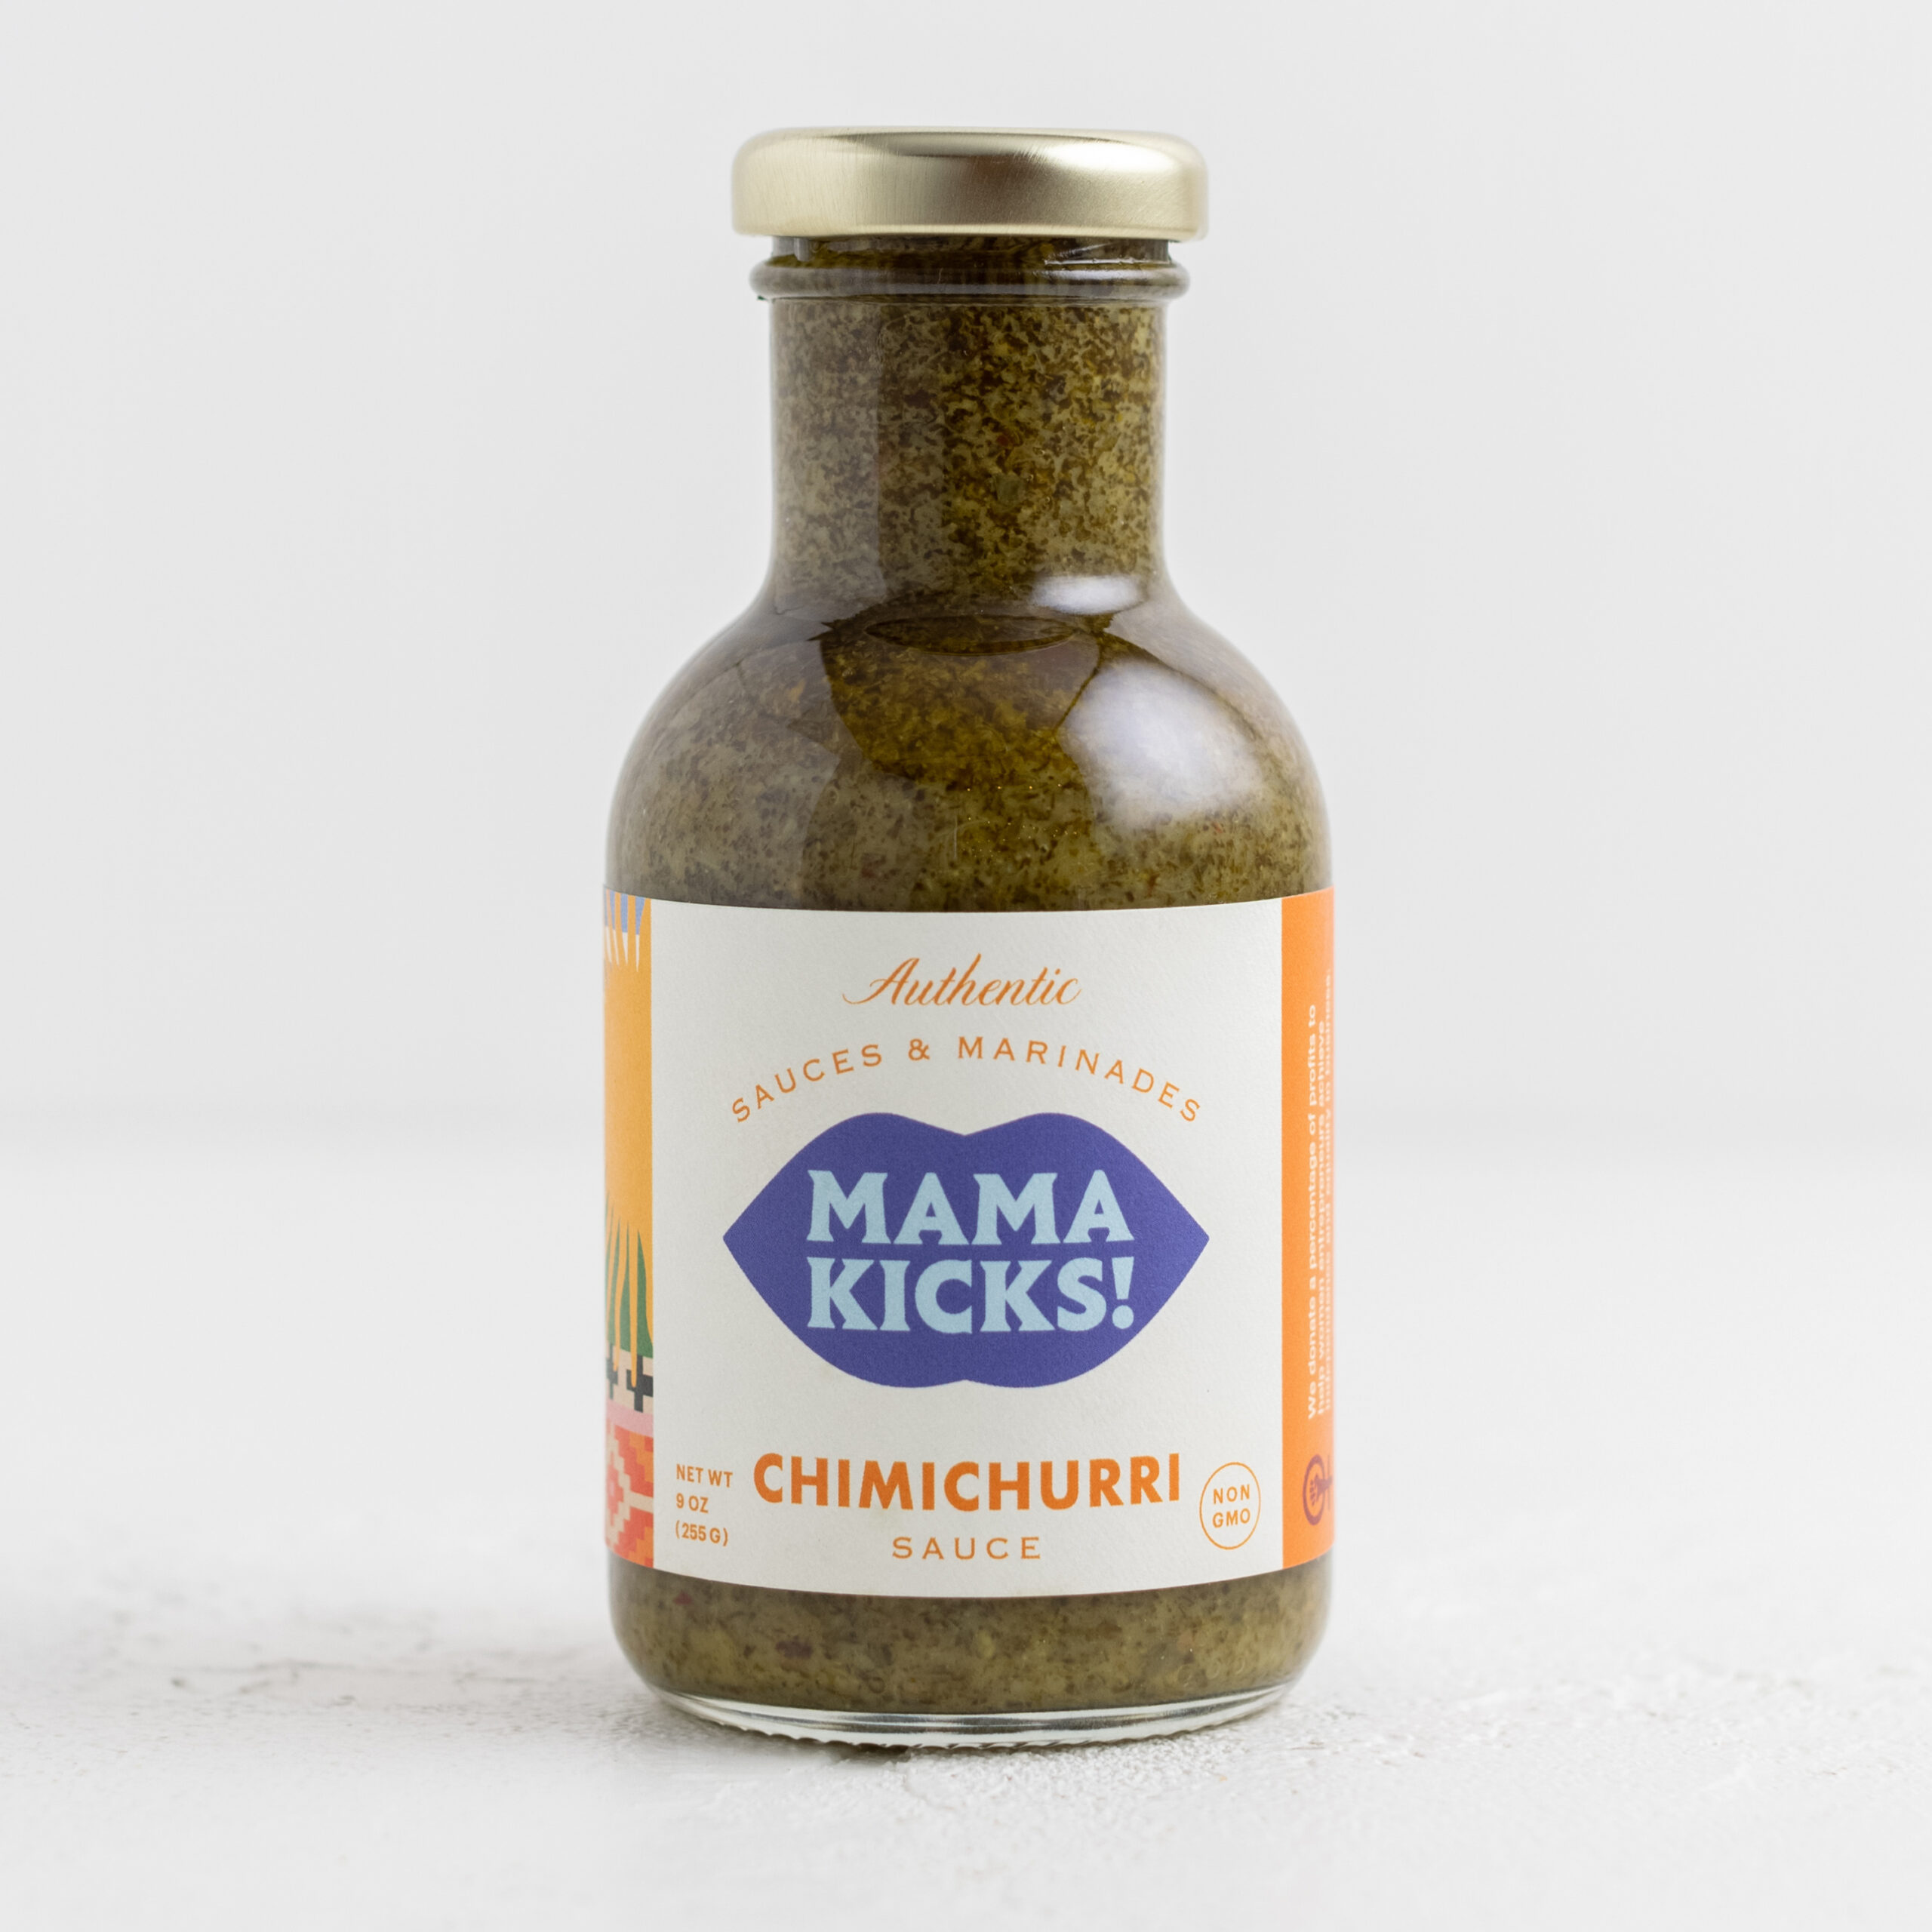 All natural gourmet sauces – 1 spicy mama